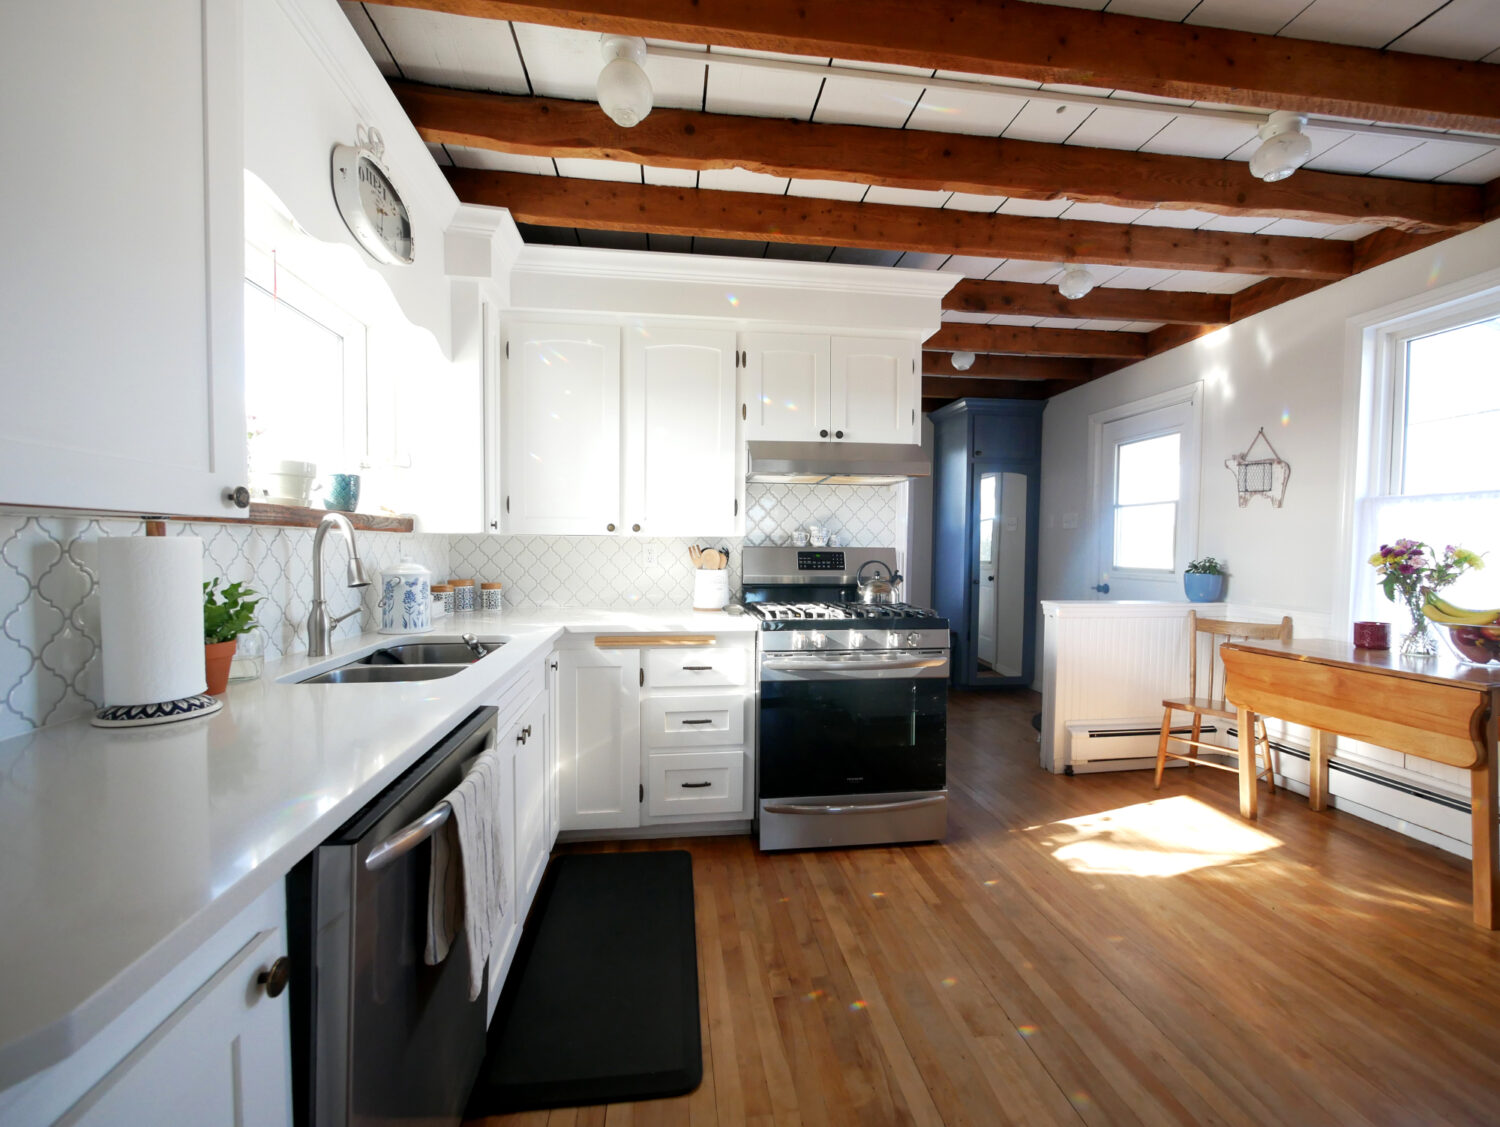 Mark Roemer Oakland Shares Tips to Remodel Your Home Without Spending More